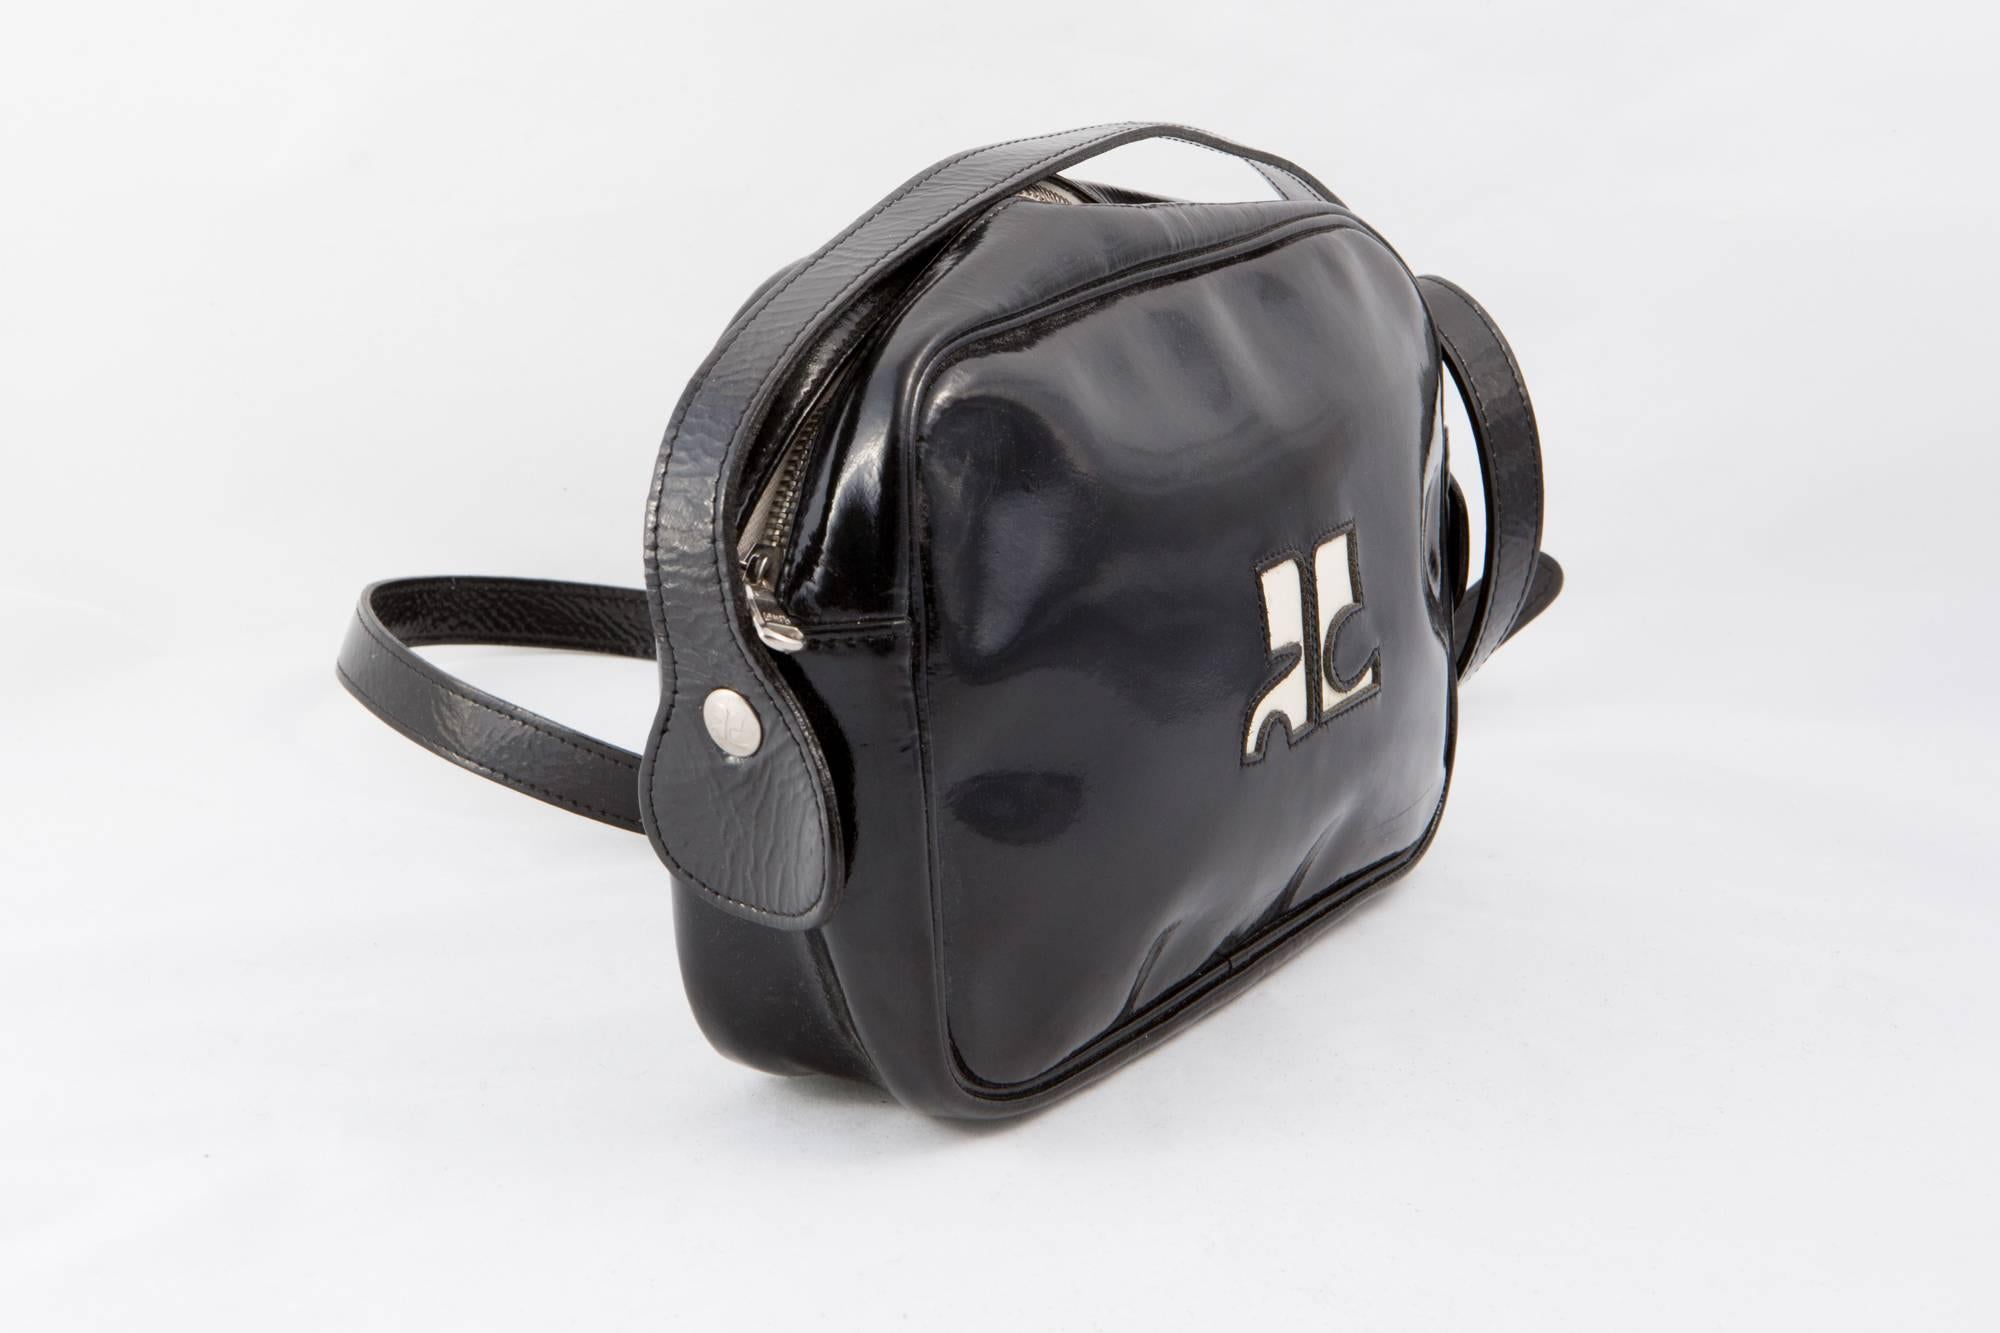 Iconic black patent Courrèges crossbody bag featuring a top zip opening, a camera shape, a top zip opening, a front white tone logo, a long adjustable shoulder strap (in. (122 cm), an inside white lining with an inside pocket.
In good vintage